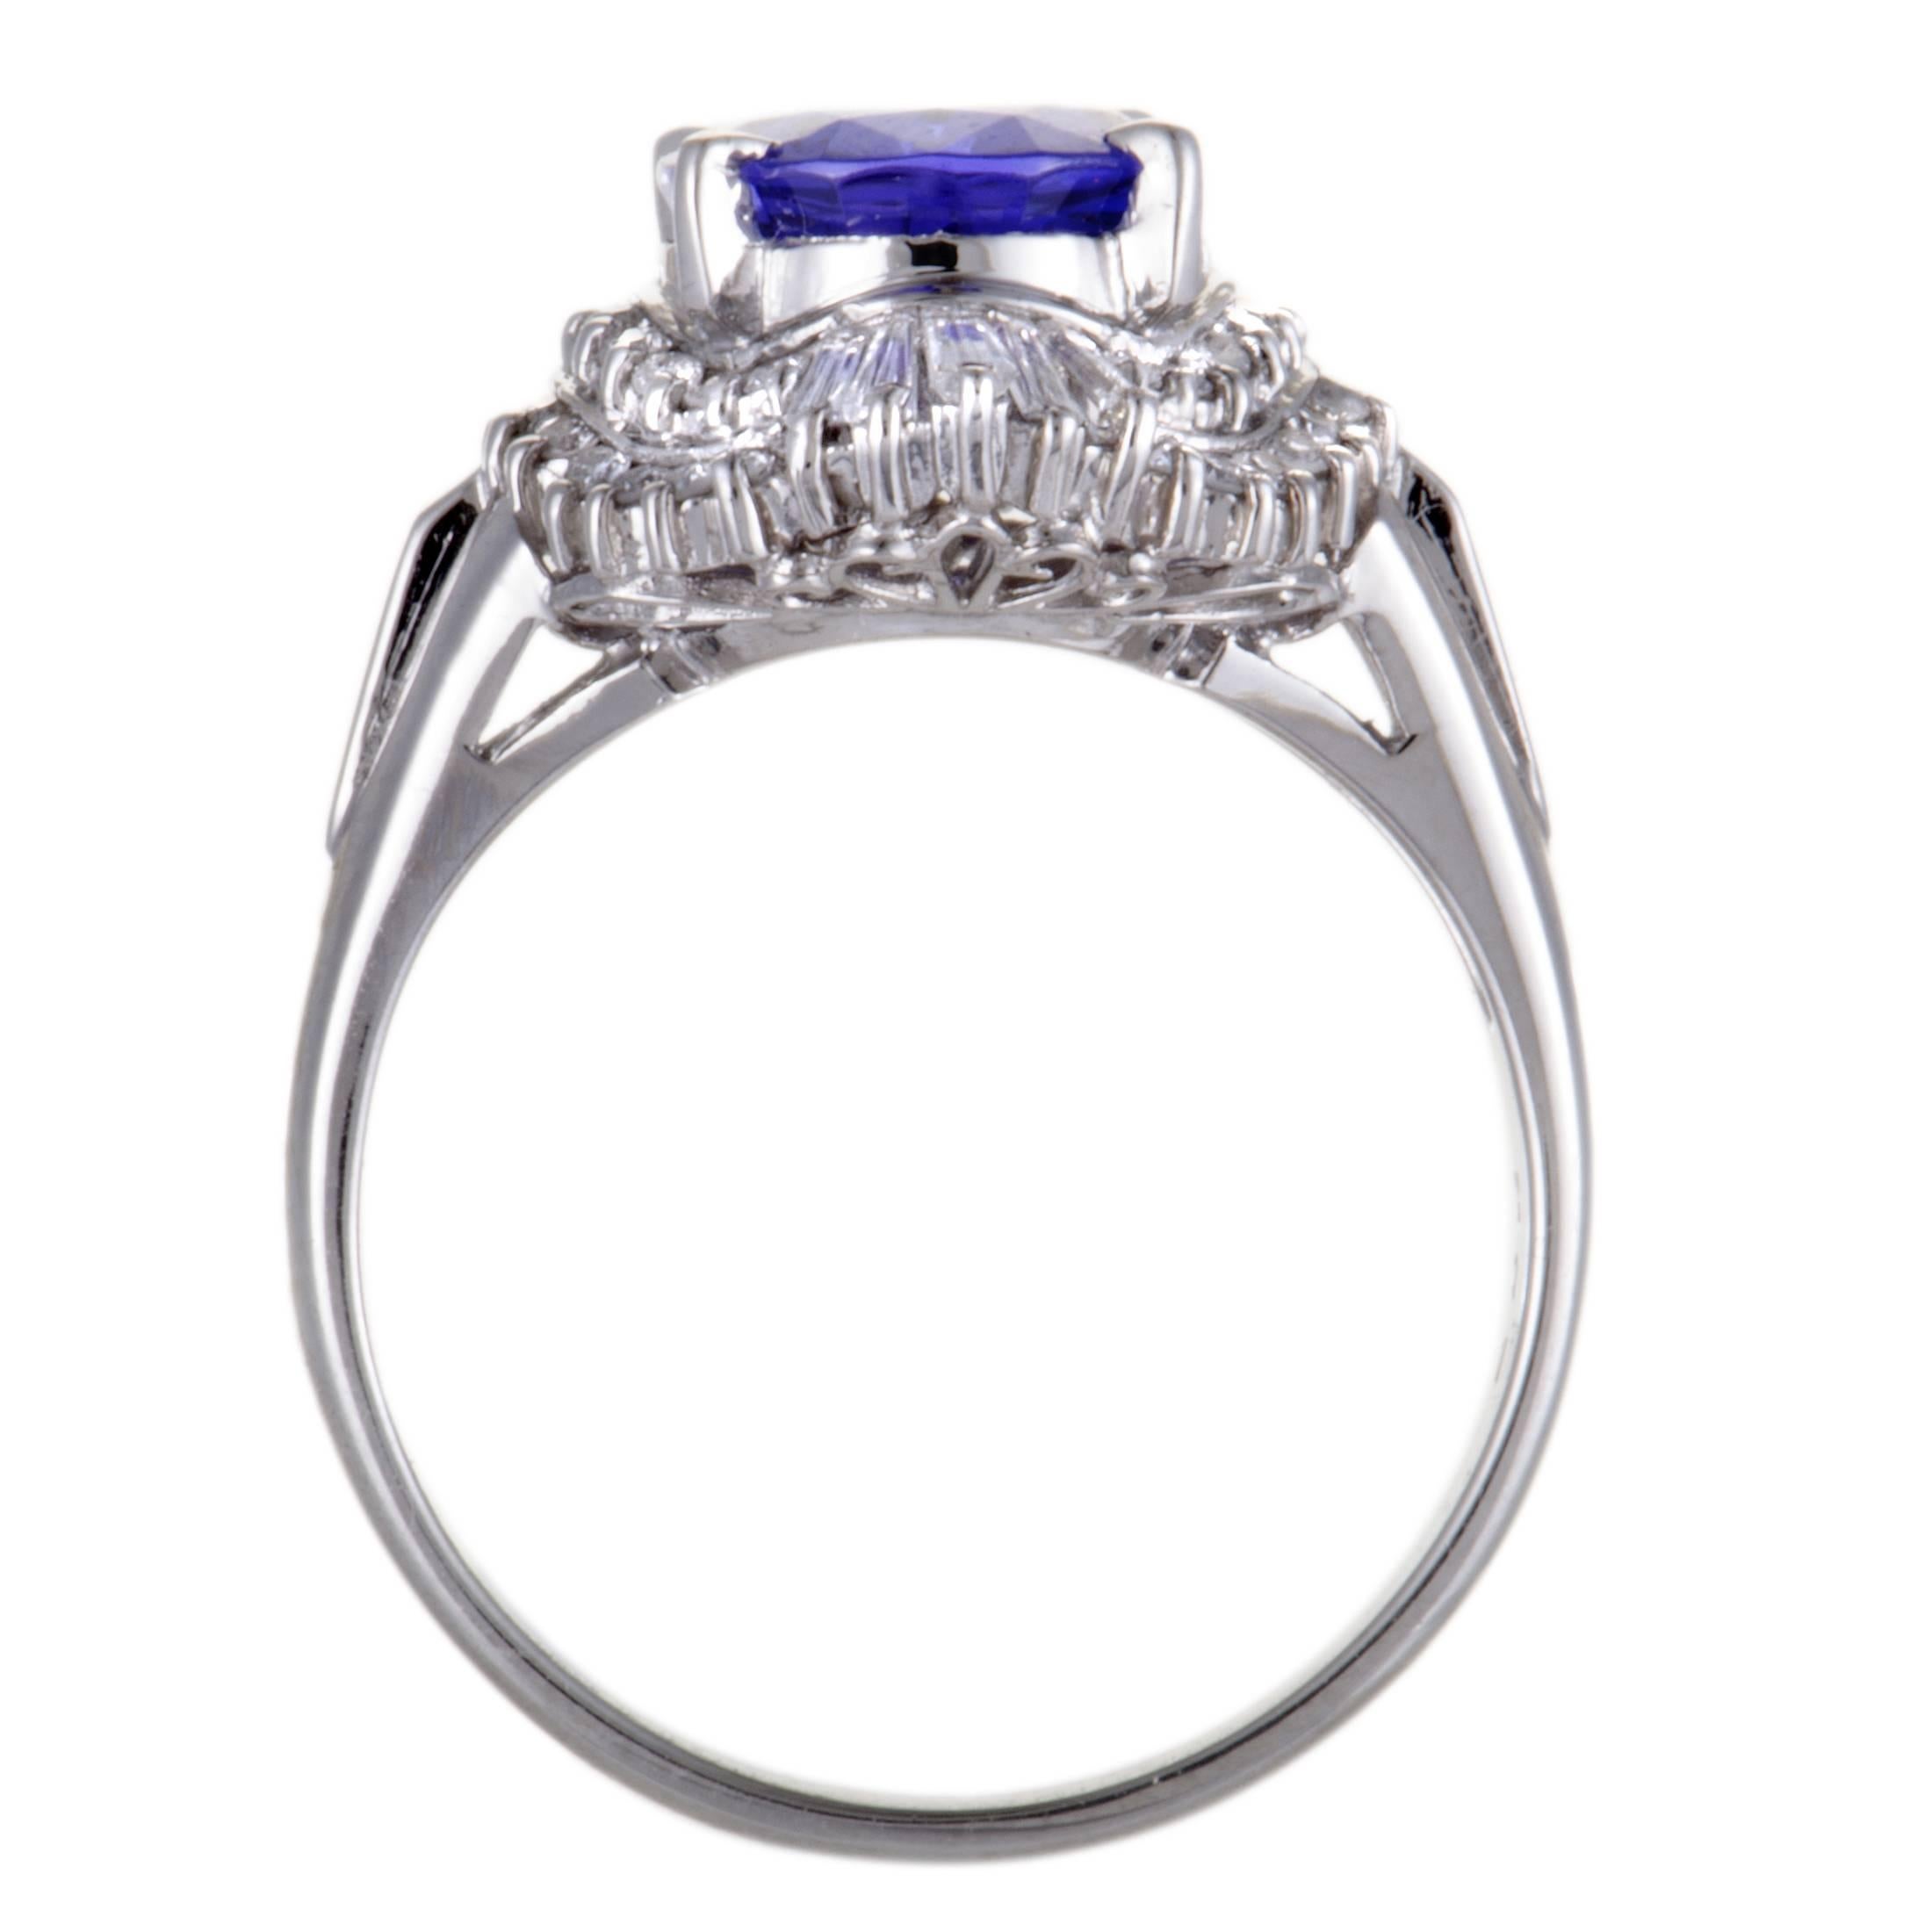 Sensationally crafted in shimmering platinum, this gorgeous ring is a perfect example of sheer beauty! The stunning ring is adorned in 0.45ct of dazzling diamonds surrounding a captivating blue tanzanite of 2.82ct that immensely elevates the value